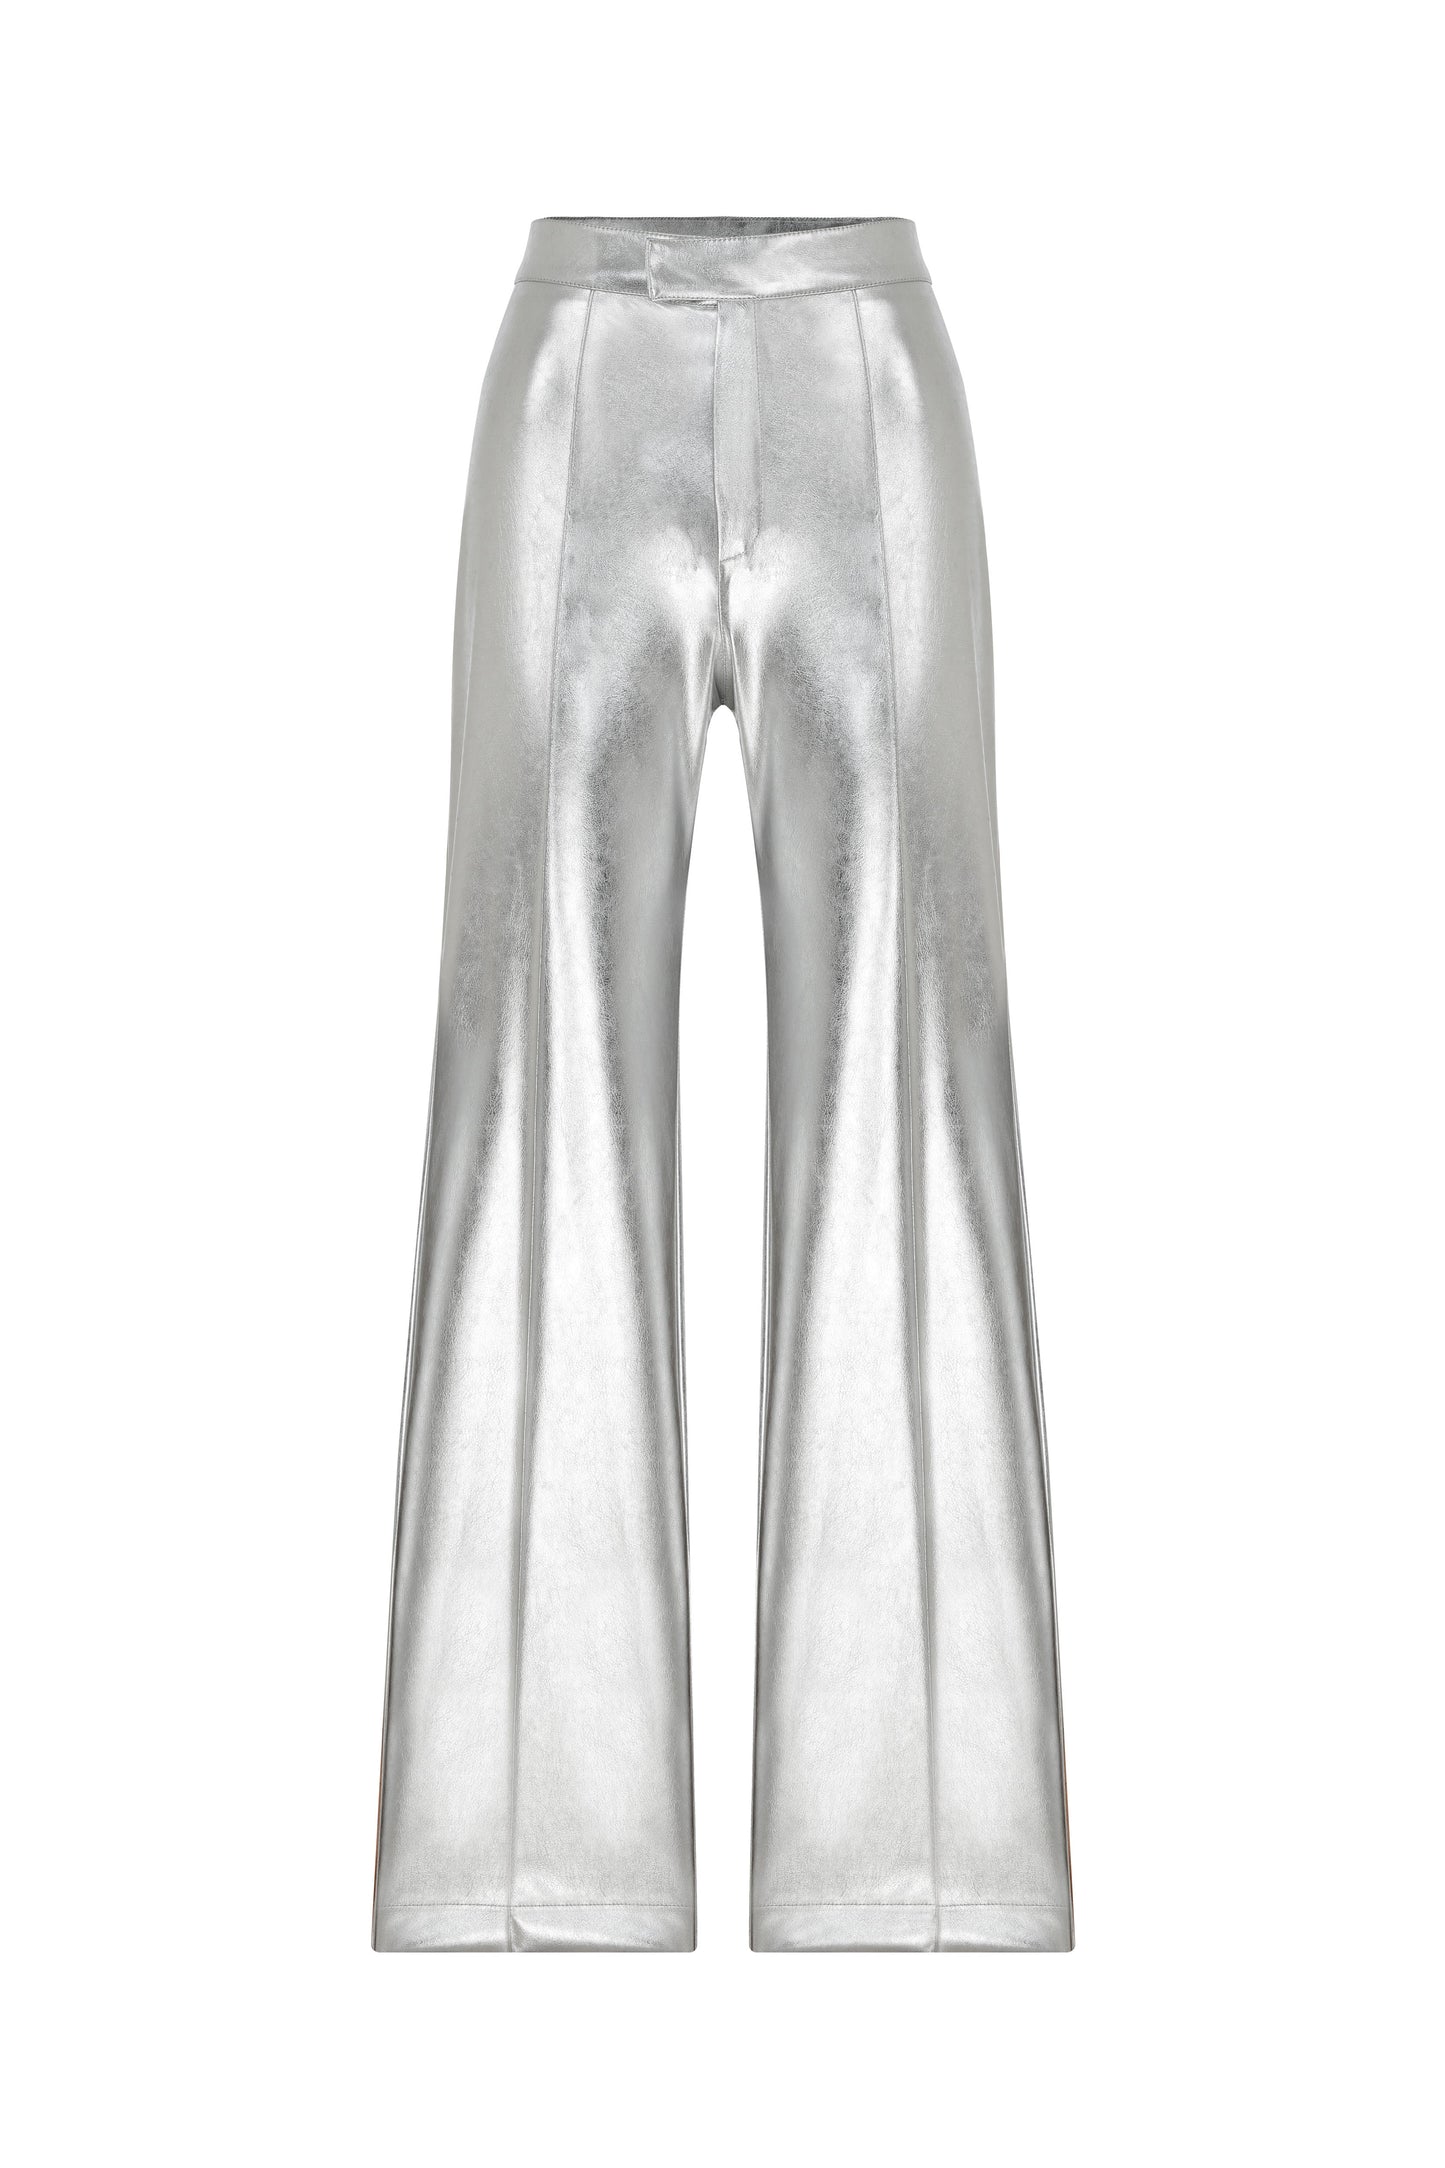 Millie Vegan Leather Straight Cut Trousers